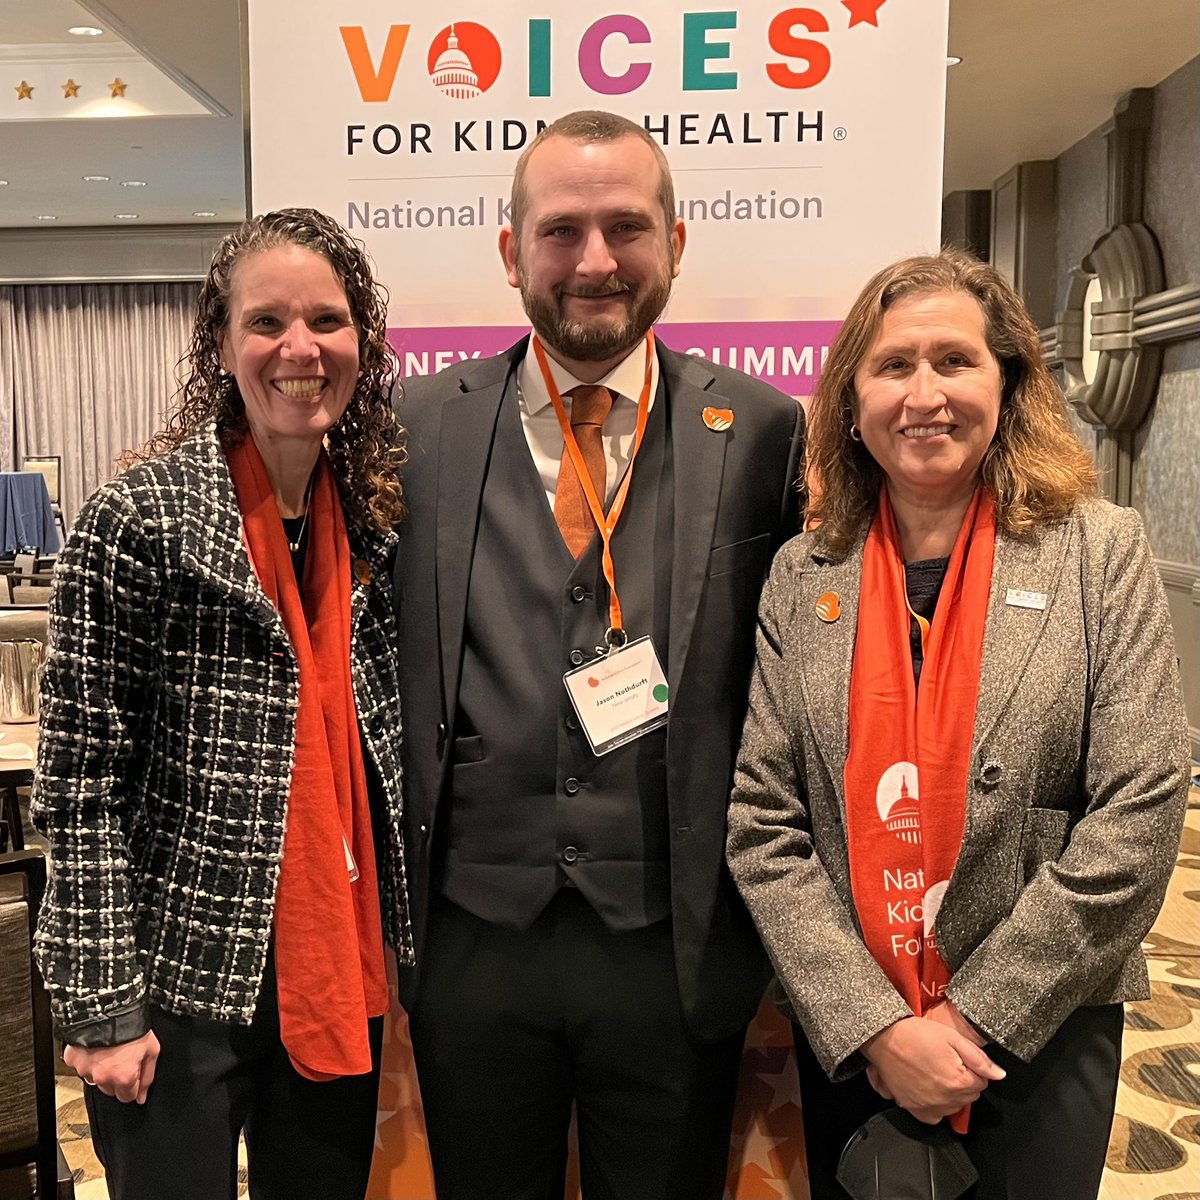 We’re a small group from New Jersey, but we’re ready to meet w/ our federal representatives and advocate on behalf of organ donors and kidney patients. Dana and I are living kidney donors. Susana is a two time kidney recipient.

#MyKidneyVoice #MyKidneysMyLife #HeartYourKidneys